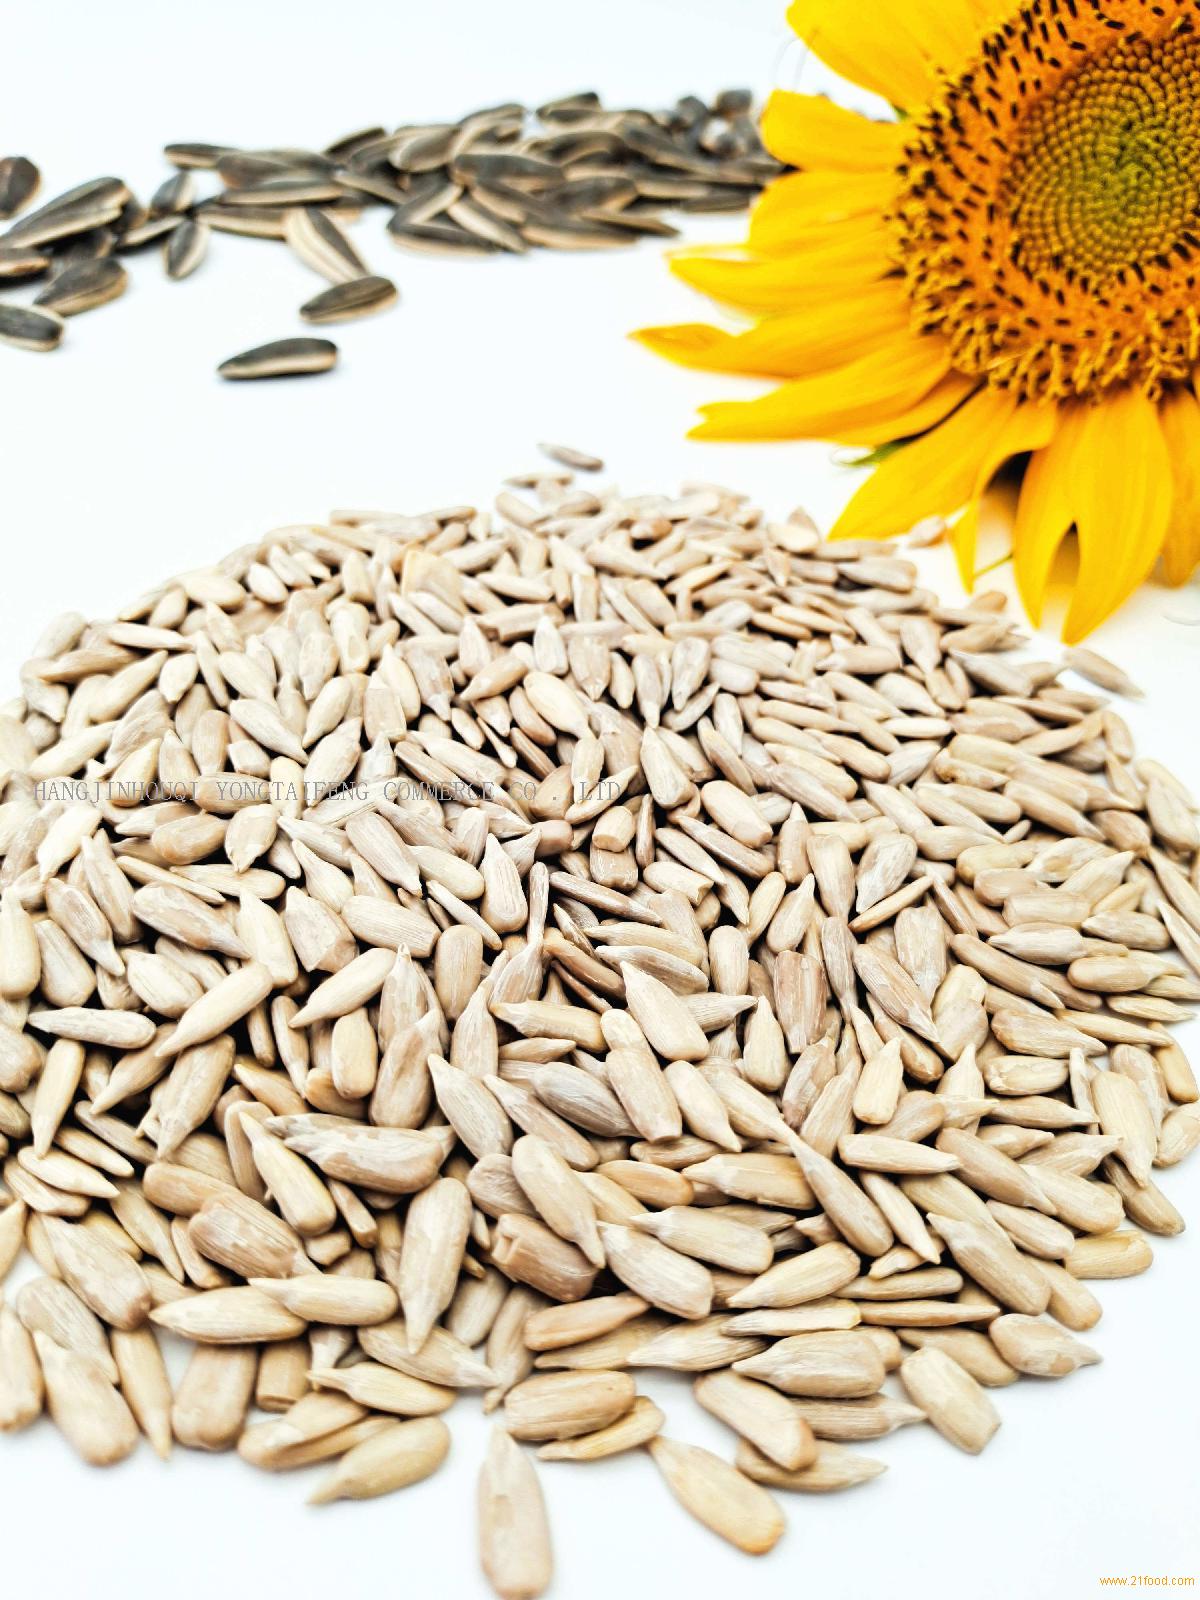 The Best Ways to Eat Sunflower Kernels